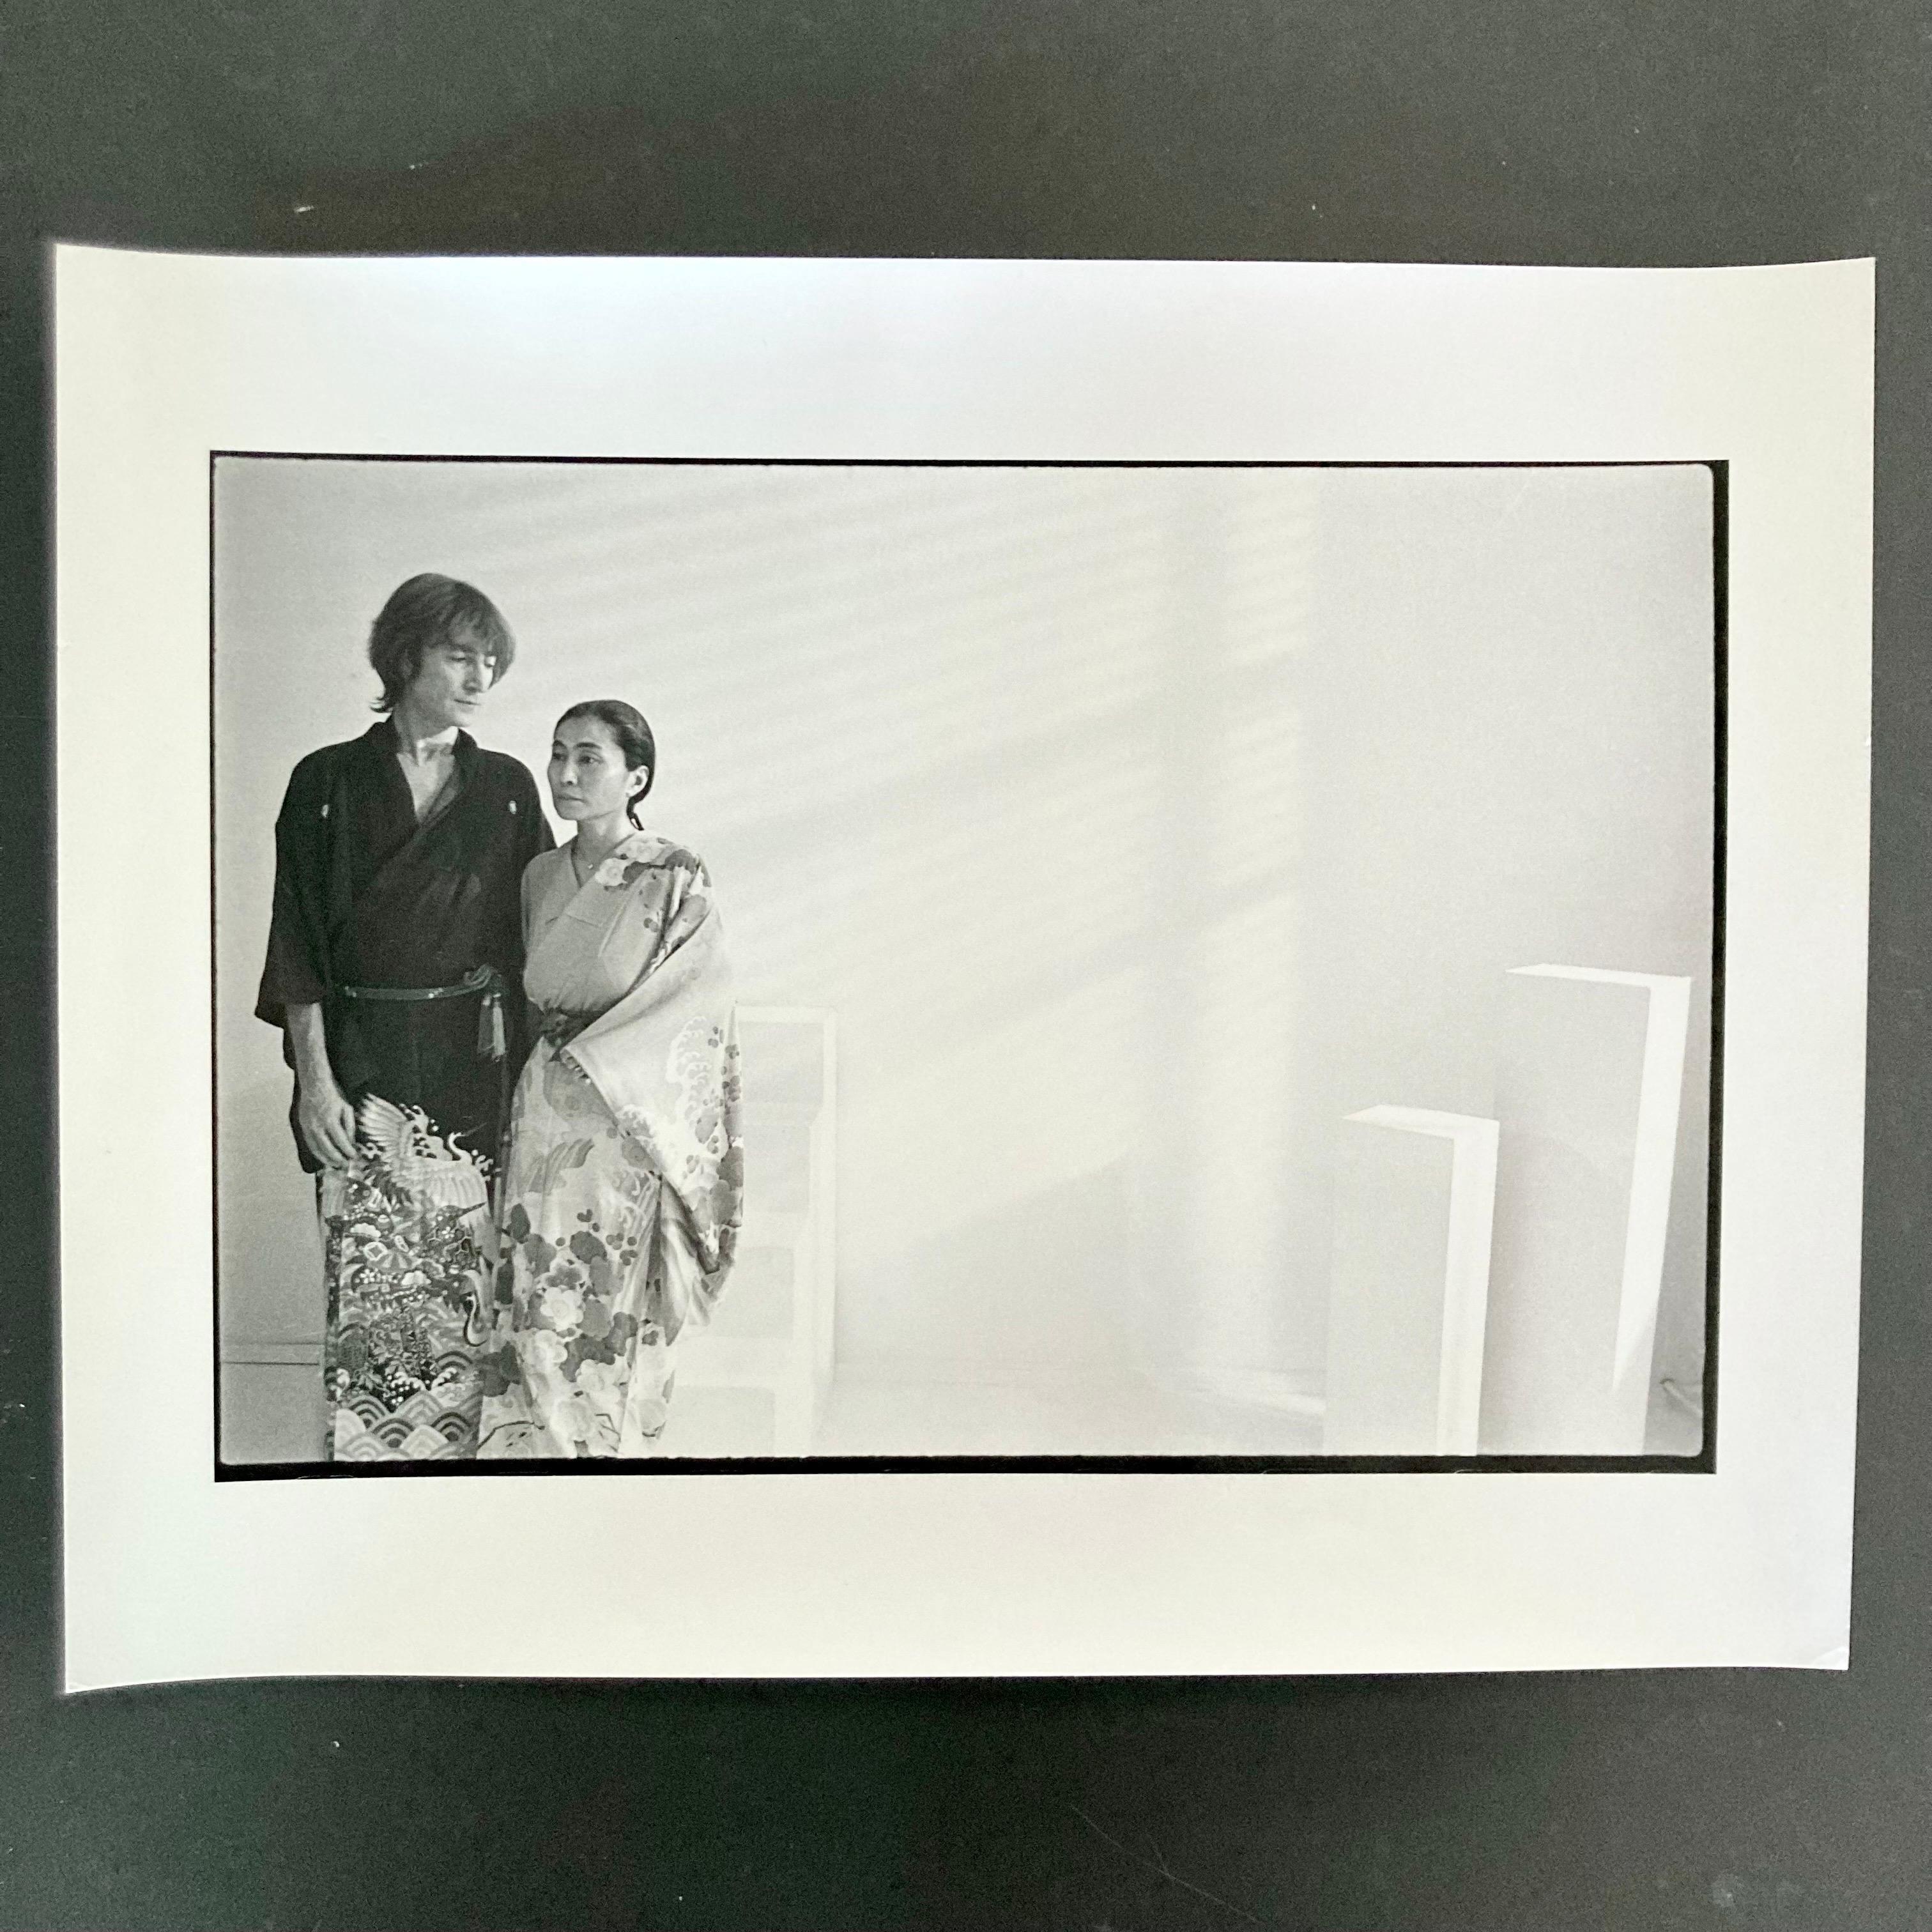 Vintage darkroom print of John Lennon and Yoko Ono taken in New York on the set of "Starting Over" November 26th 1980. This print is an original, hand printed darkroom print made by the photographer Allan Tannenbaum. 

This vintage 11x14" print is